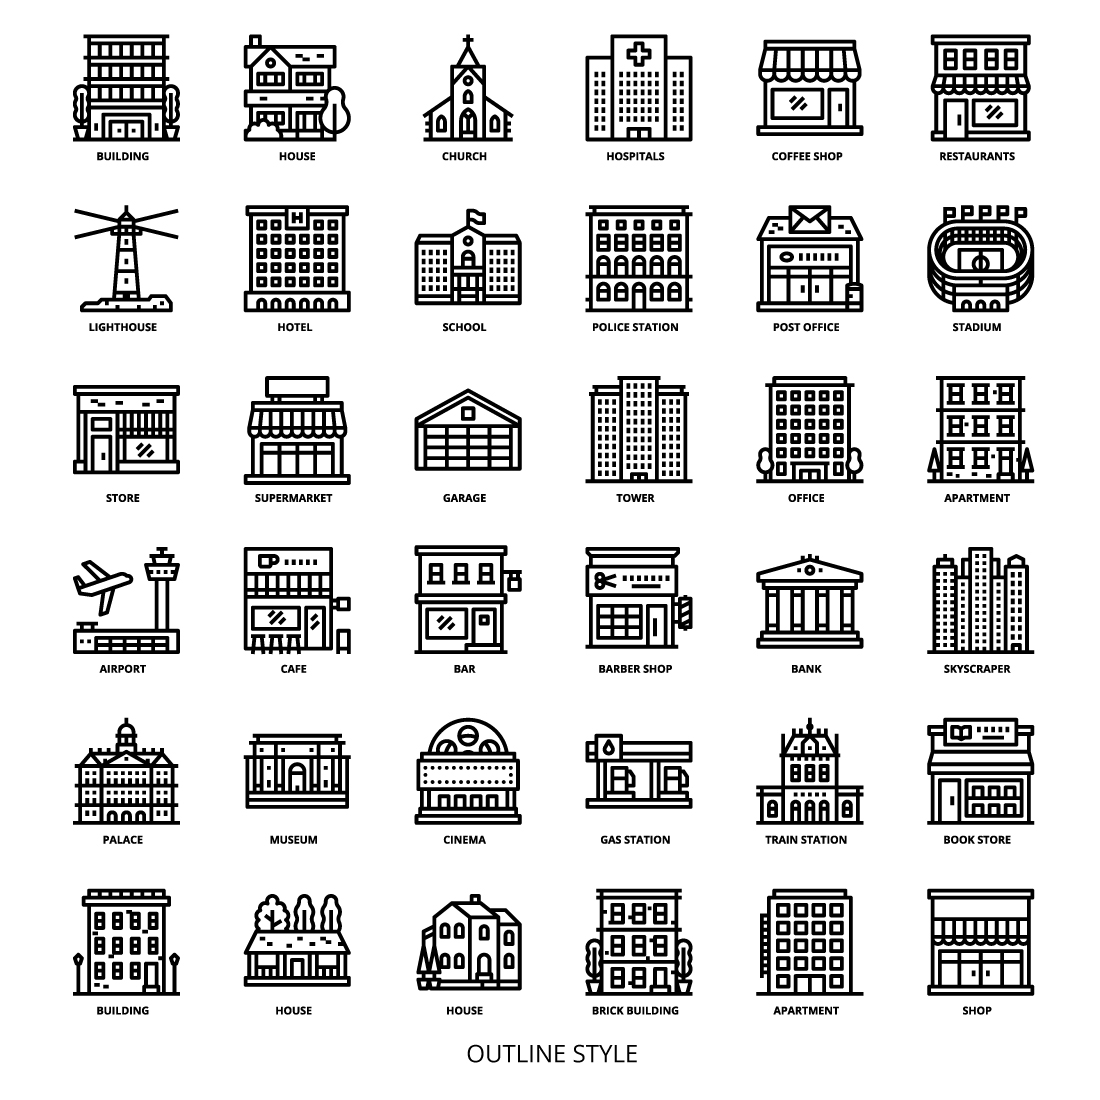 36 Building Icons Set x 4 Styles preview image.